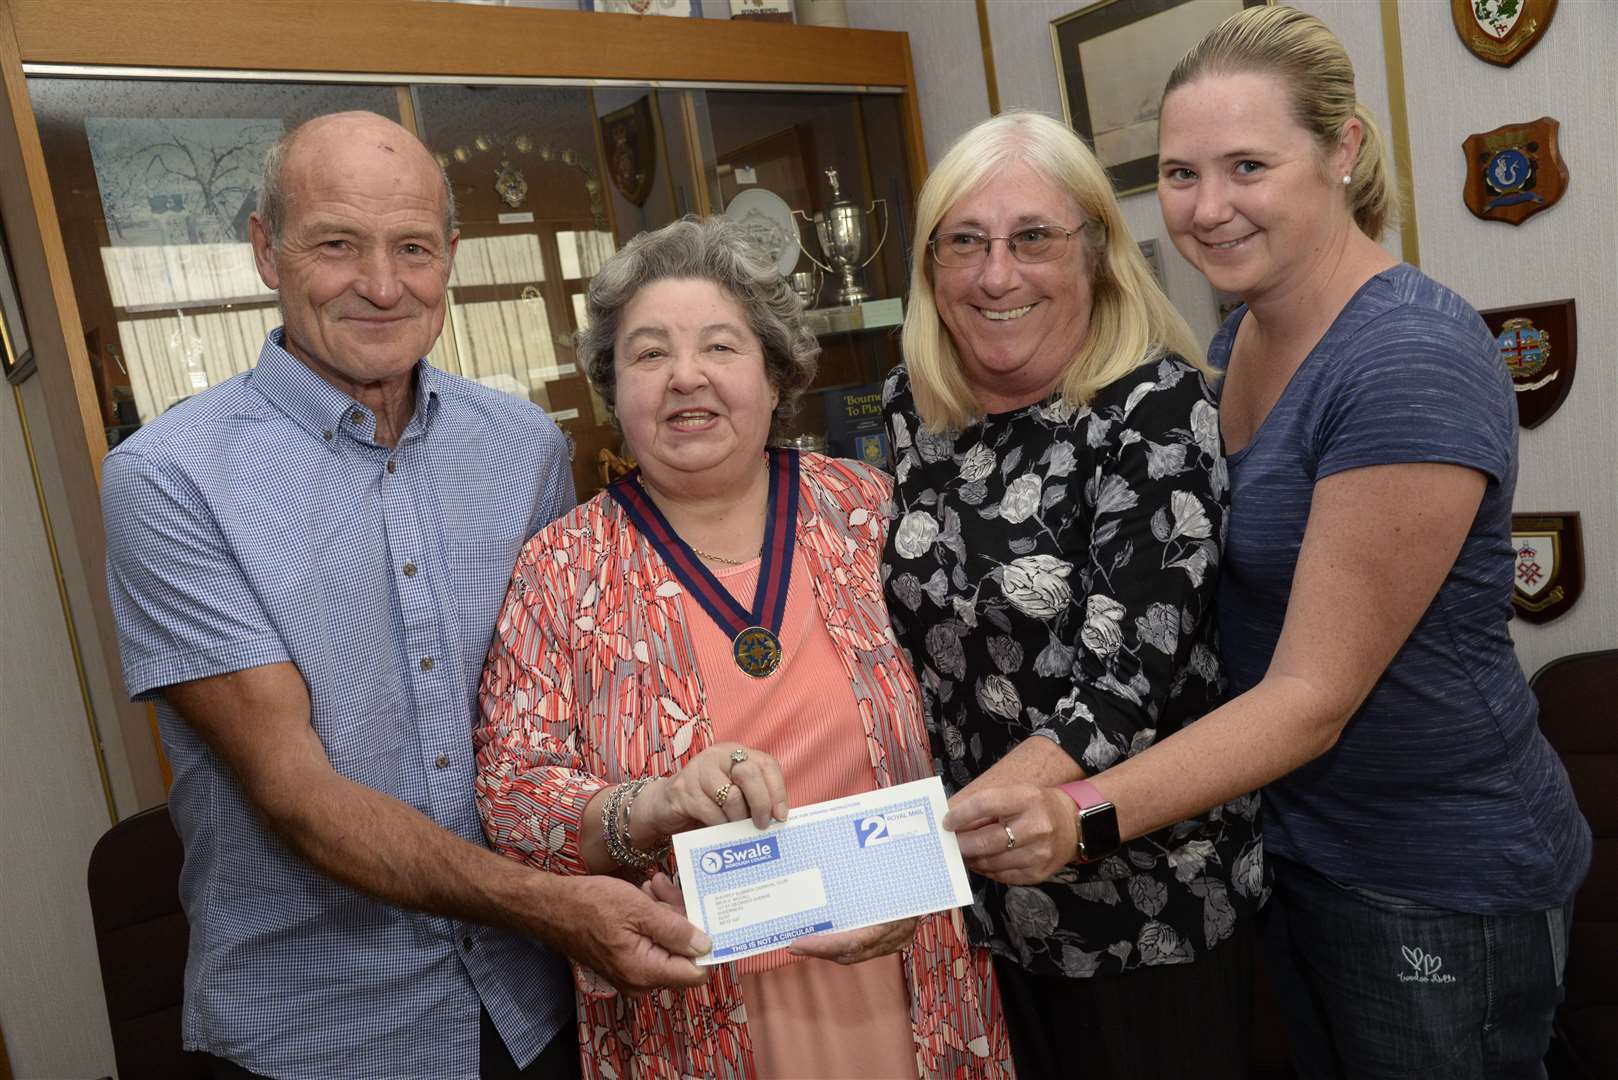 Former Swale Mayor Cllr Anita Walker presents a cheque to Bob, Joan and Lauren McCall of the Sheppey Carnival Association. Picture: Chris Davey